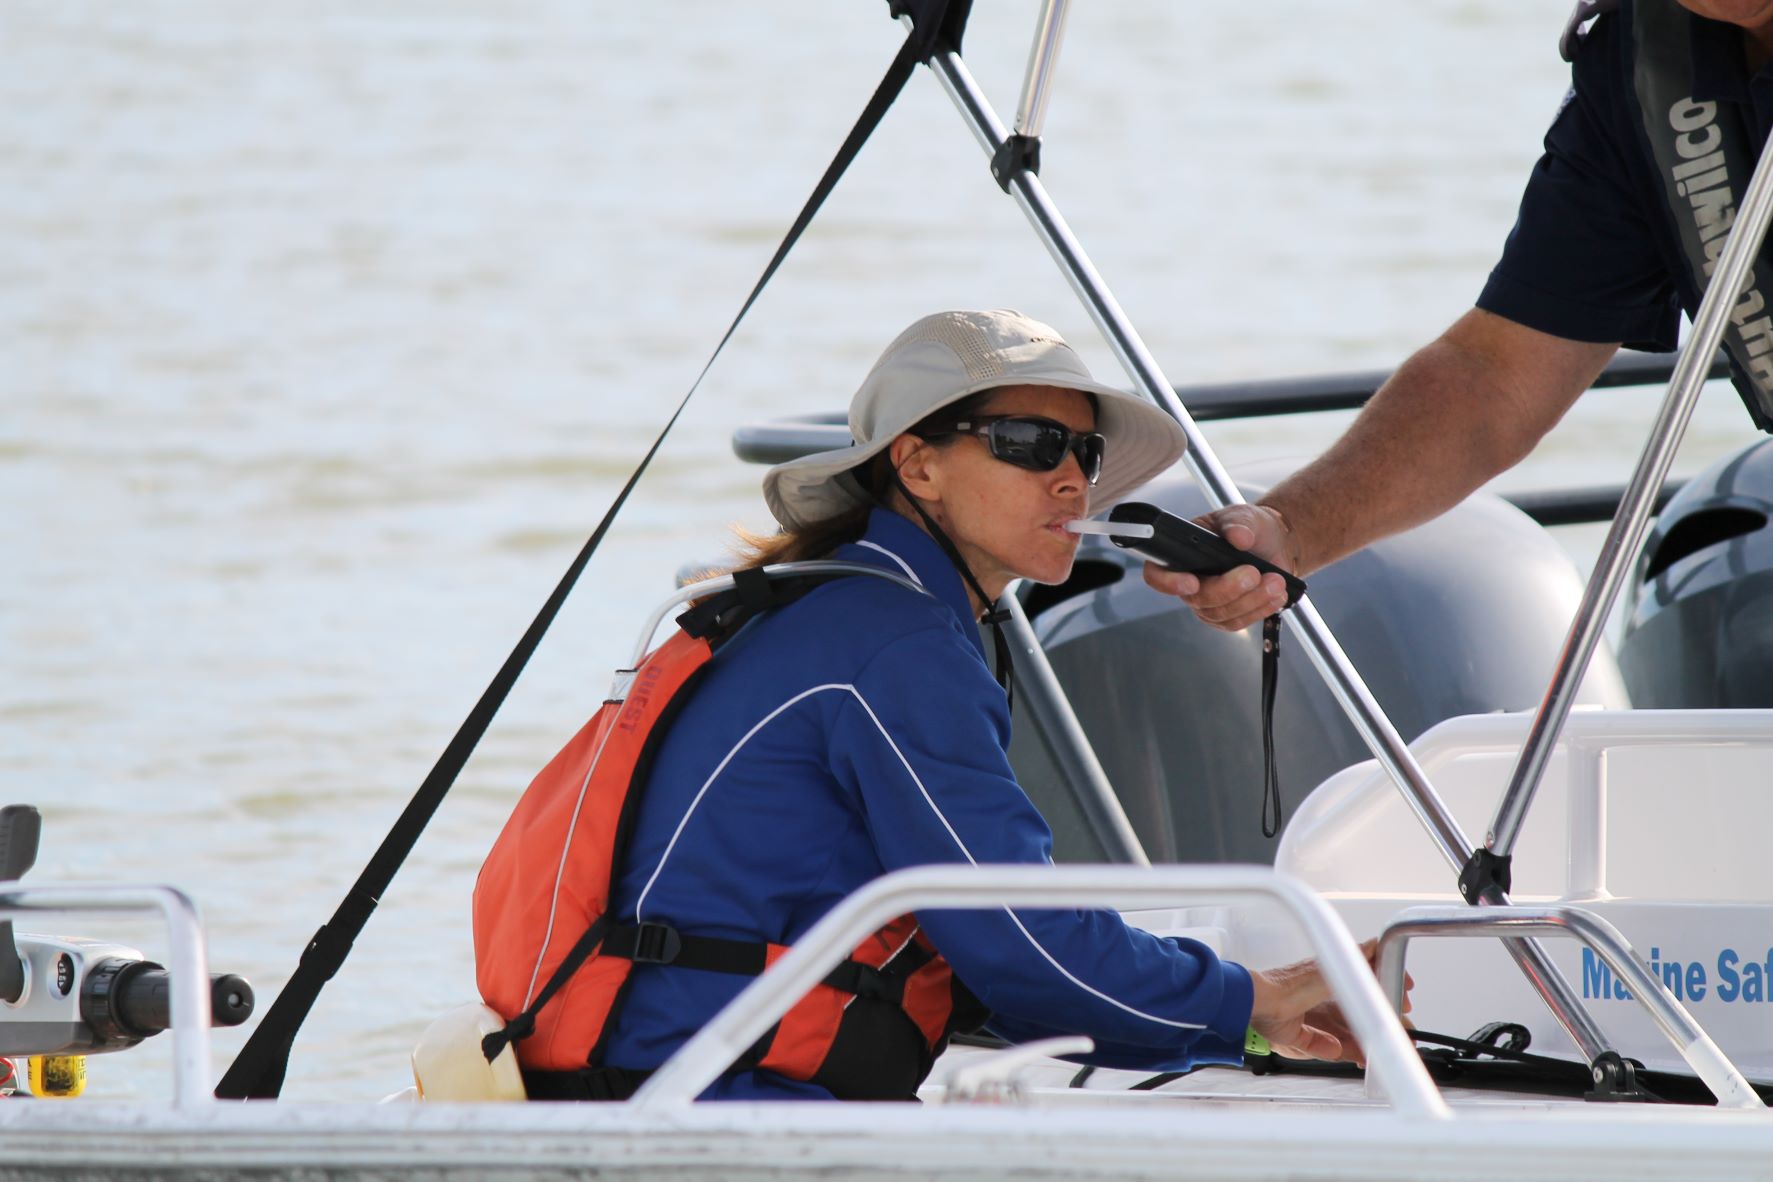 Female blowing into a blood alcohol testing device in a boat on the water